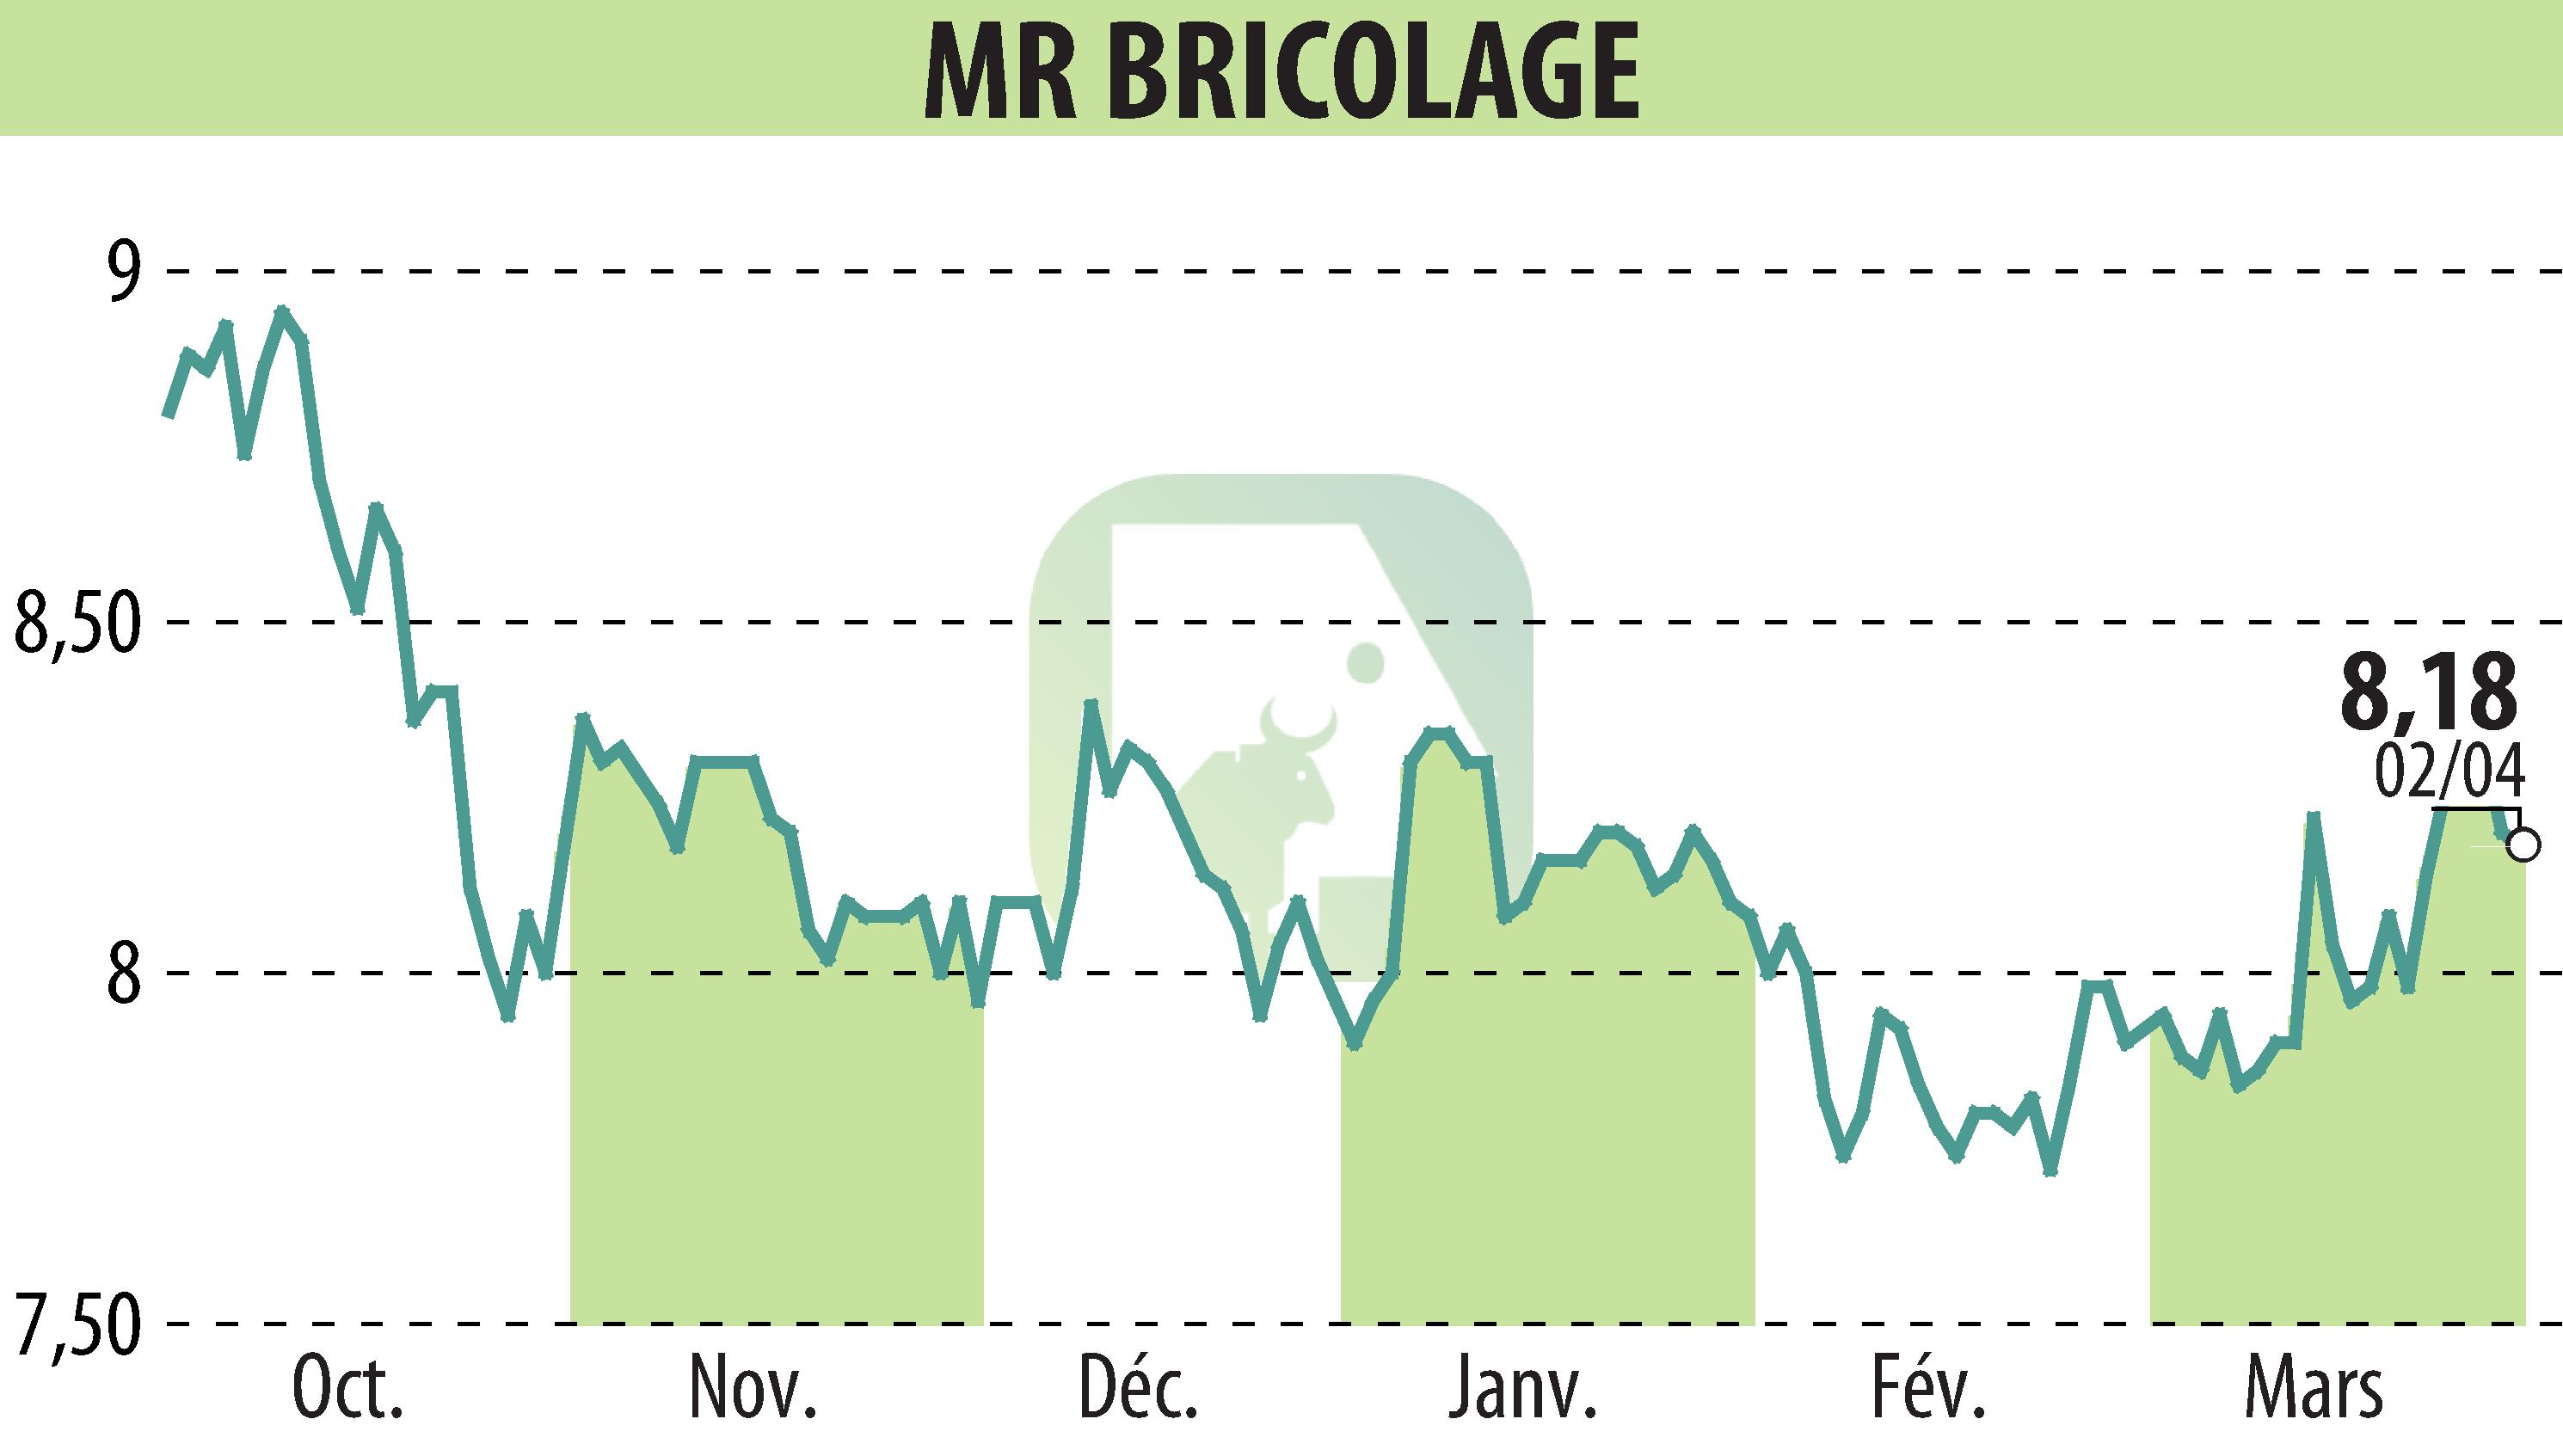 Stock price chart of MR BRICOLAGE (EPA:ALMRB) showing fluctuations.